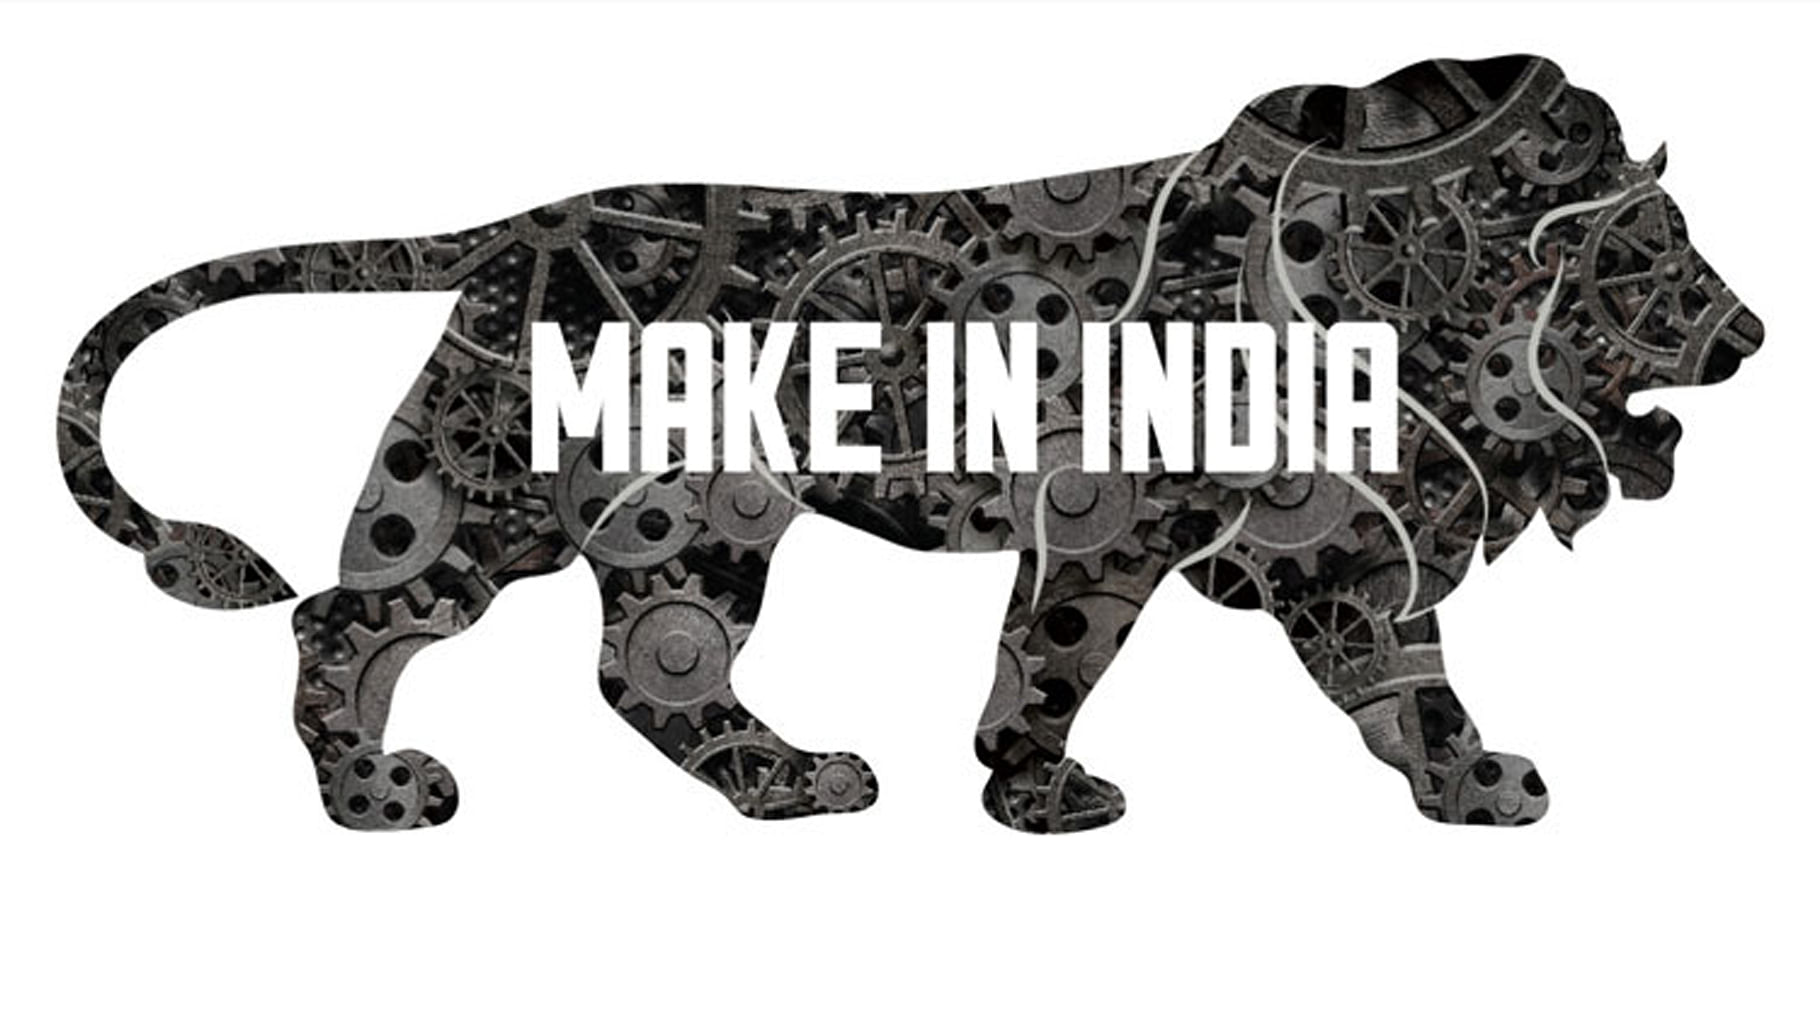 The Make in India logo. (Photo Courtesy: Make in India’s <a href="https://www.facebook.com/makeinindiaofficial/">Facebook Page</a>)